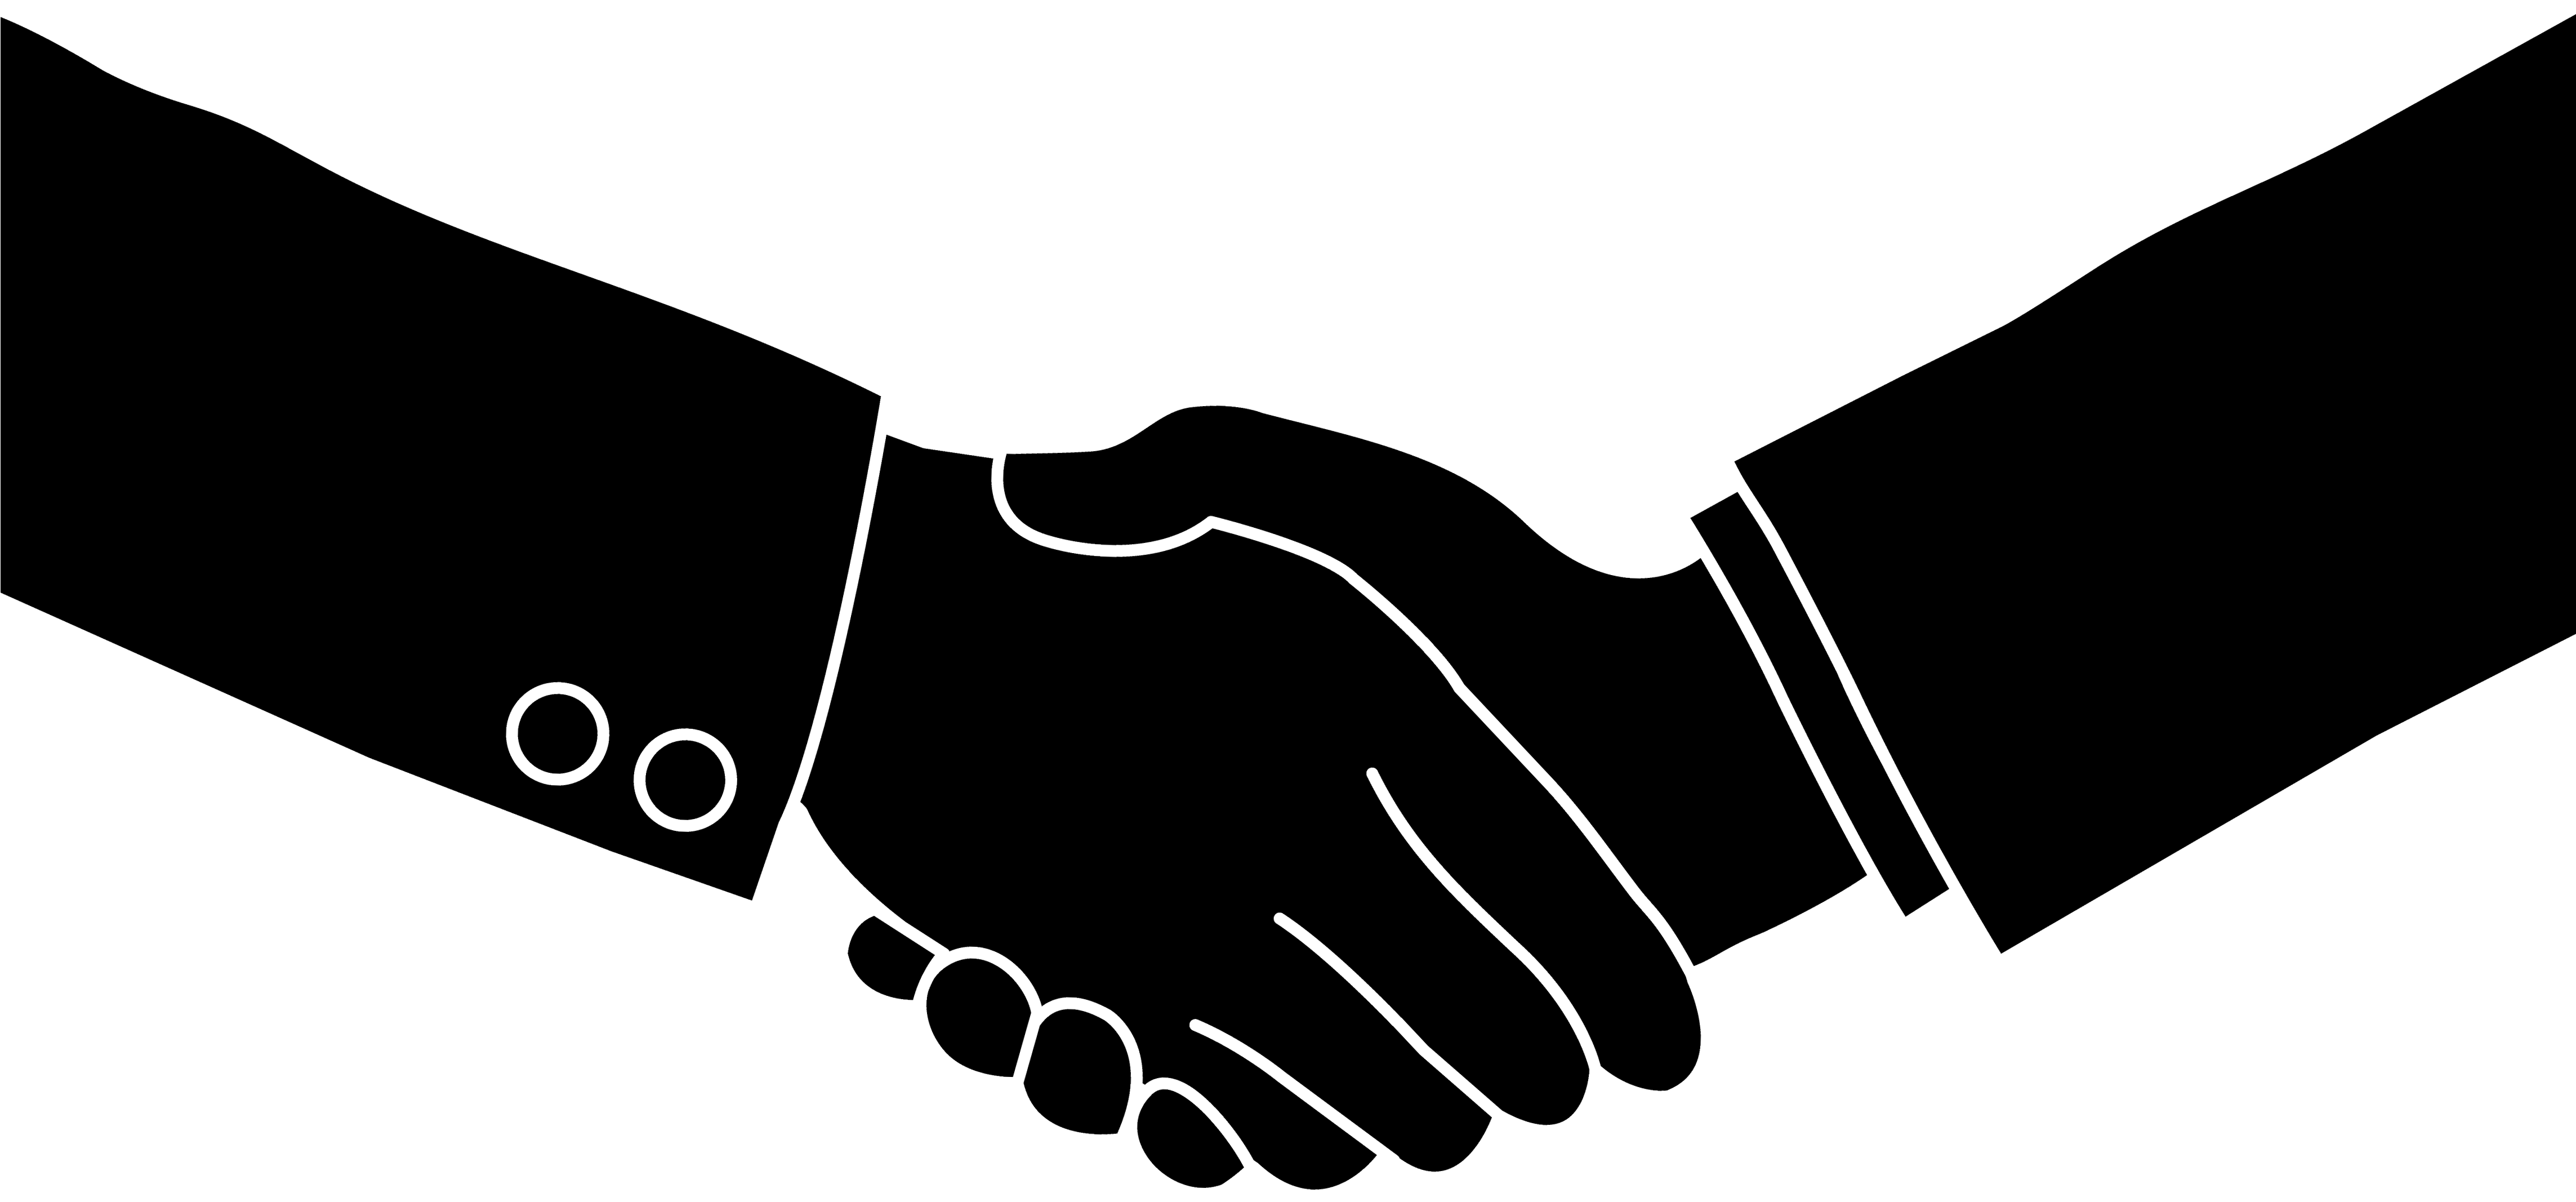 Business Handshake Black Silhouette - Ask For The Order! The Professional Sales (4781x2383)